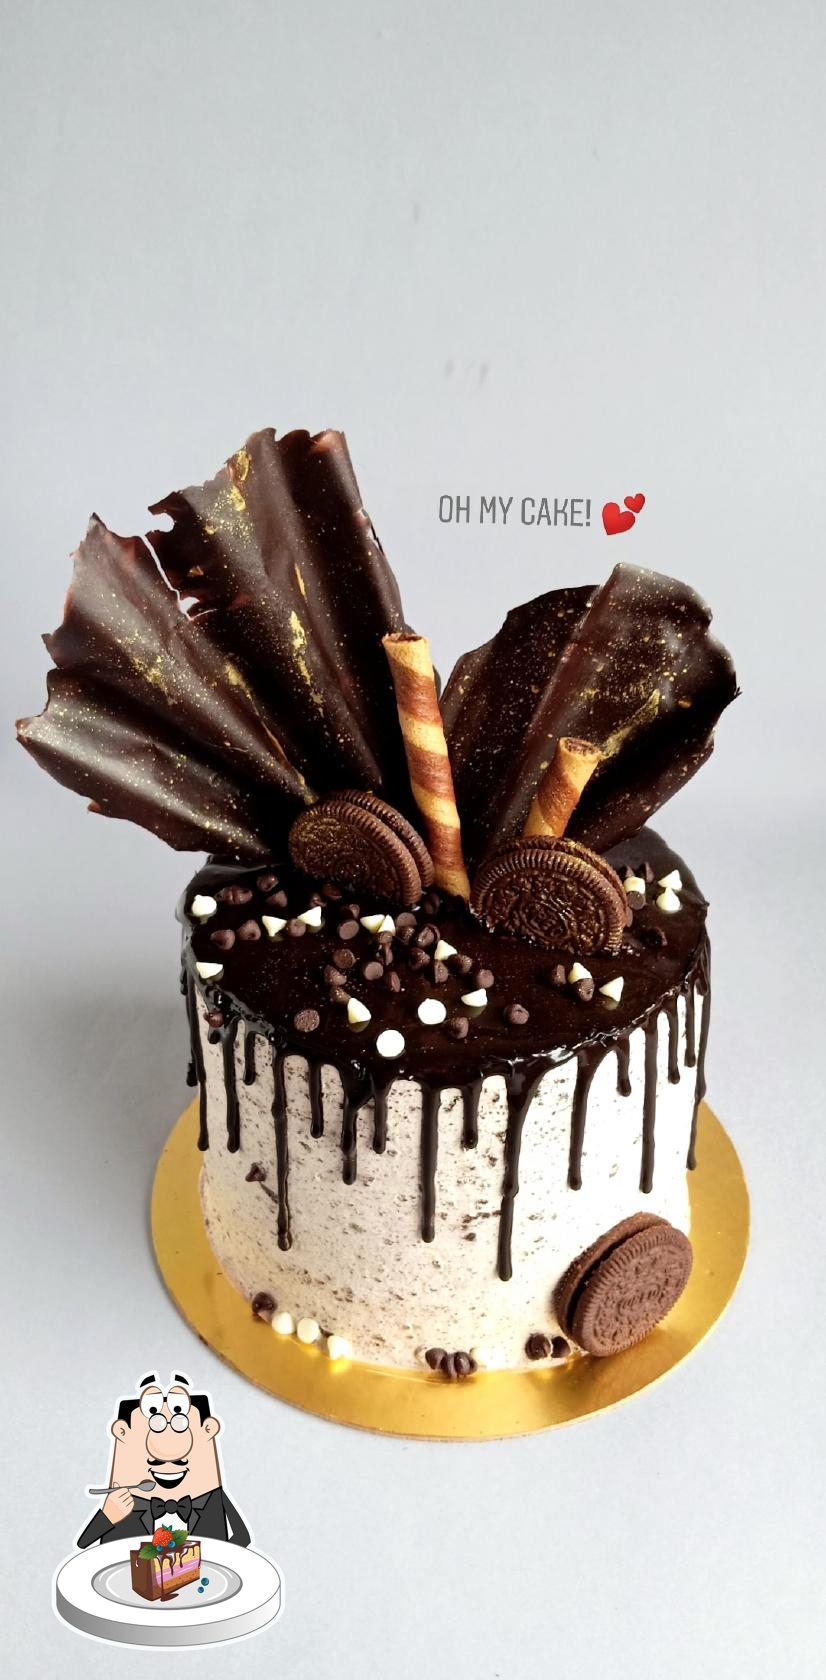 Oh My Cake! | Cakes & Bakery in Colombo | Ceylon Pages